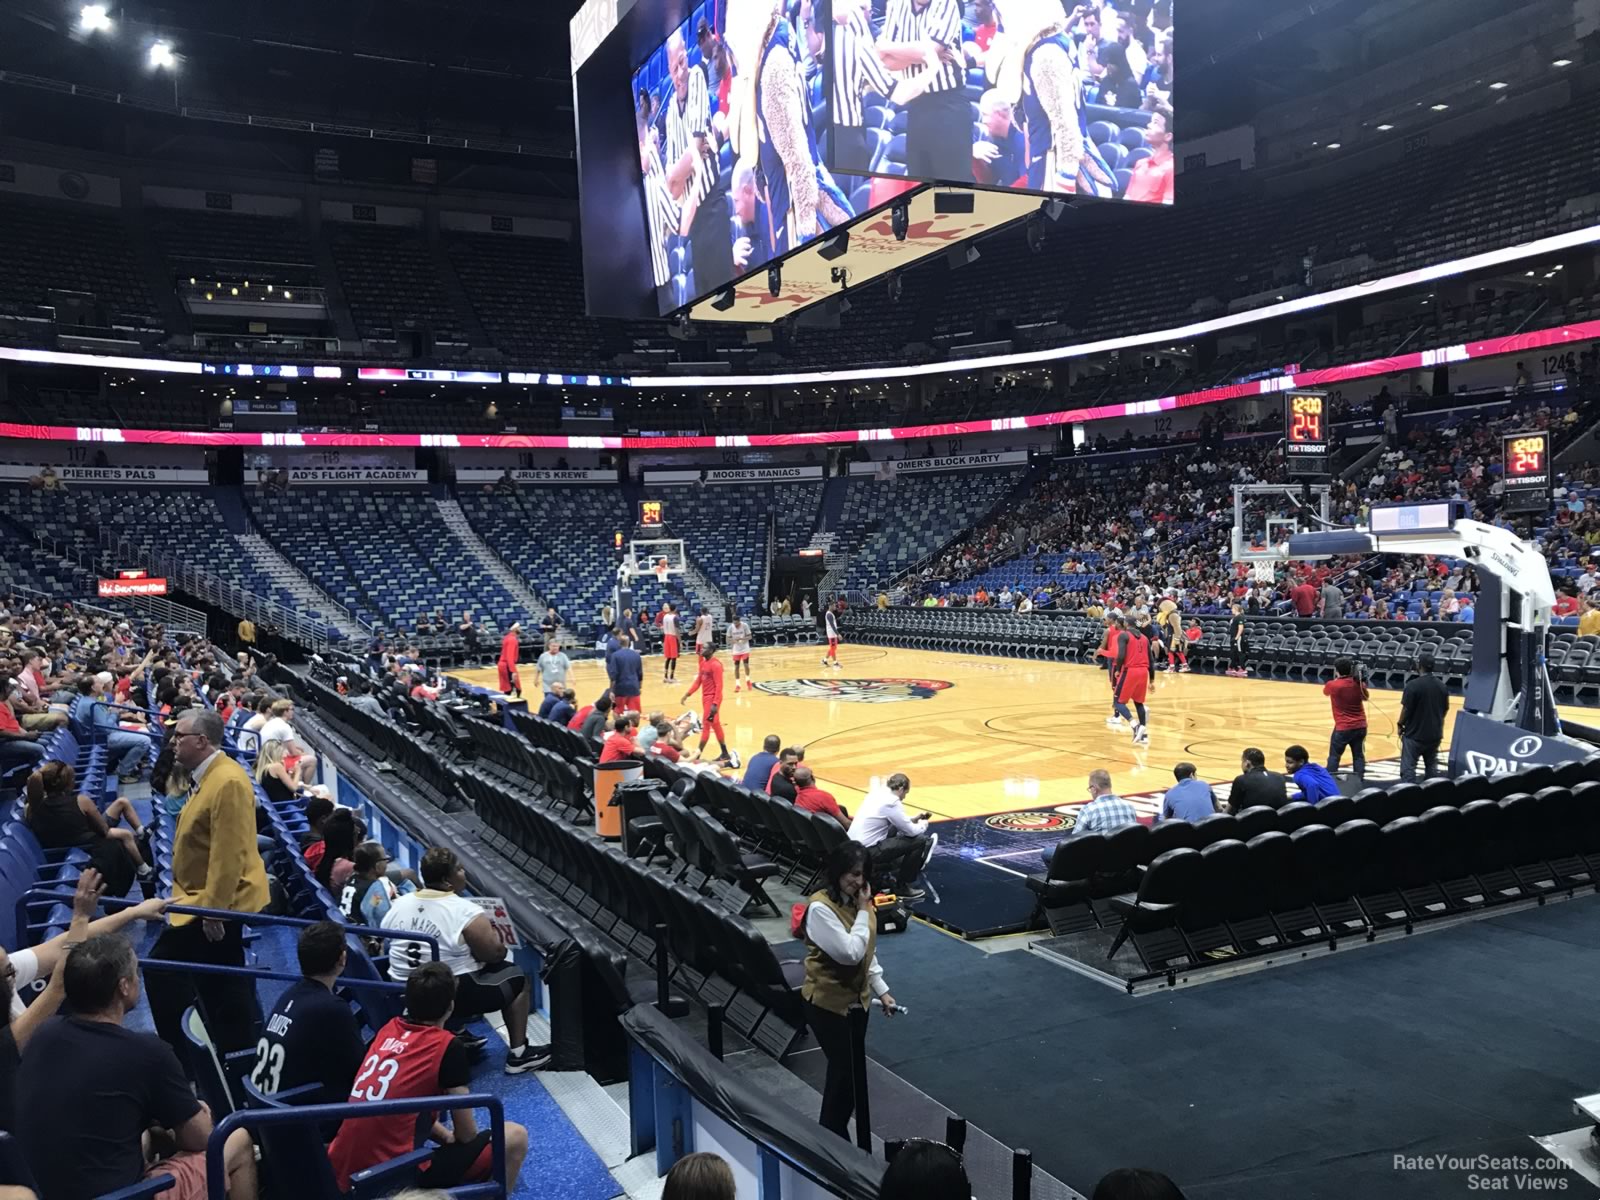 section 109, row 9 seat view  for basketball - smoothie king center